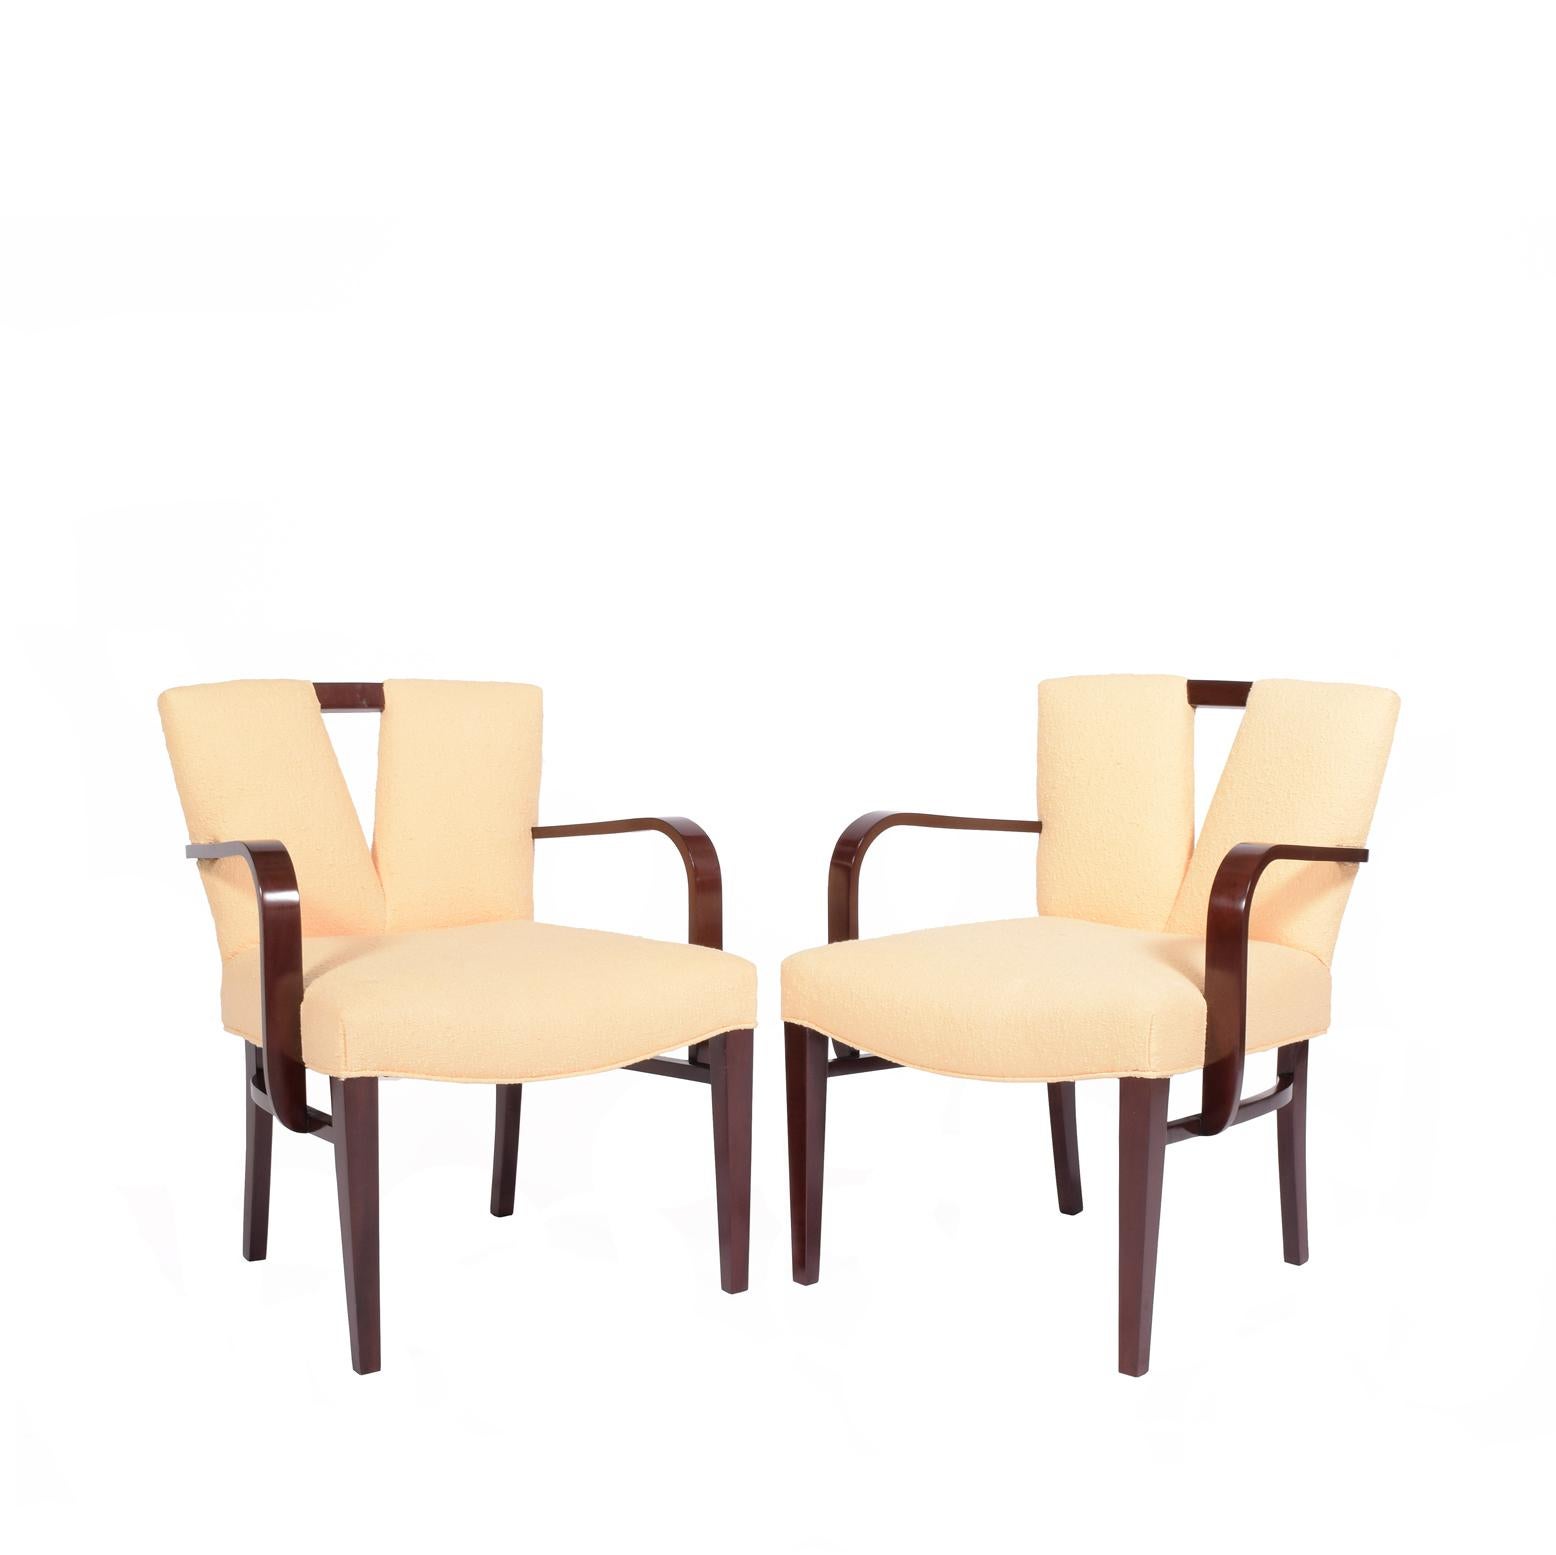 Set of two armchairs mahogany stain wood and new upholstery design by Paul Frankl for Johnson Furniture.